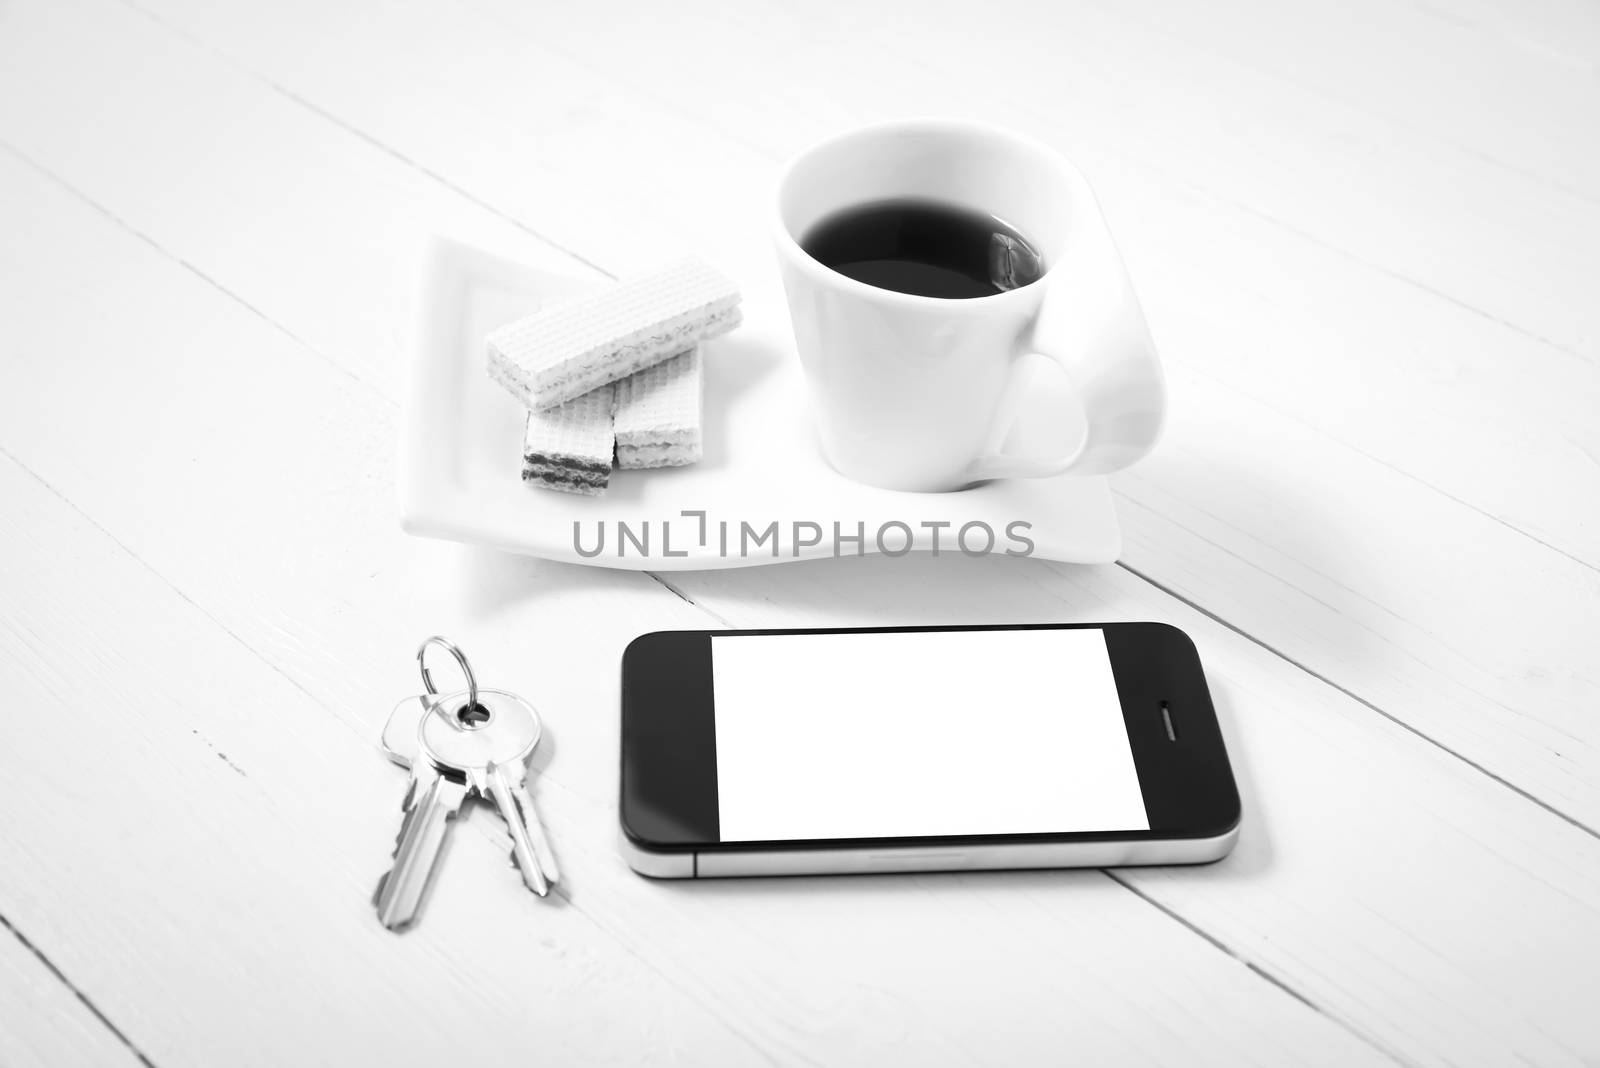 coffee cup with wafer,phone,key on white wood background black and white color